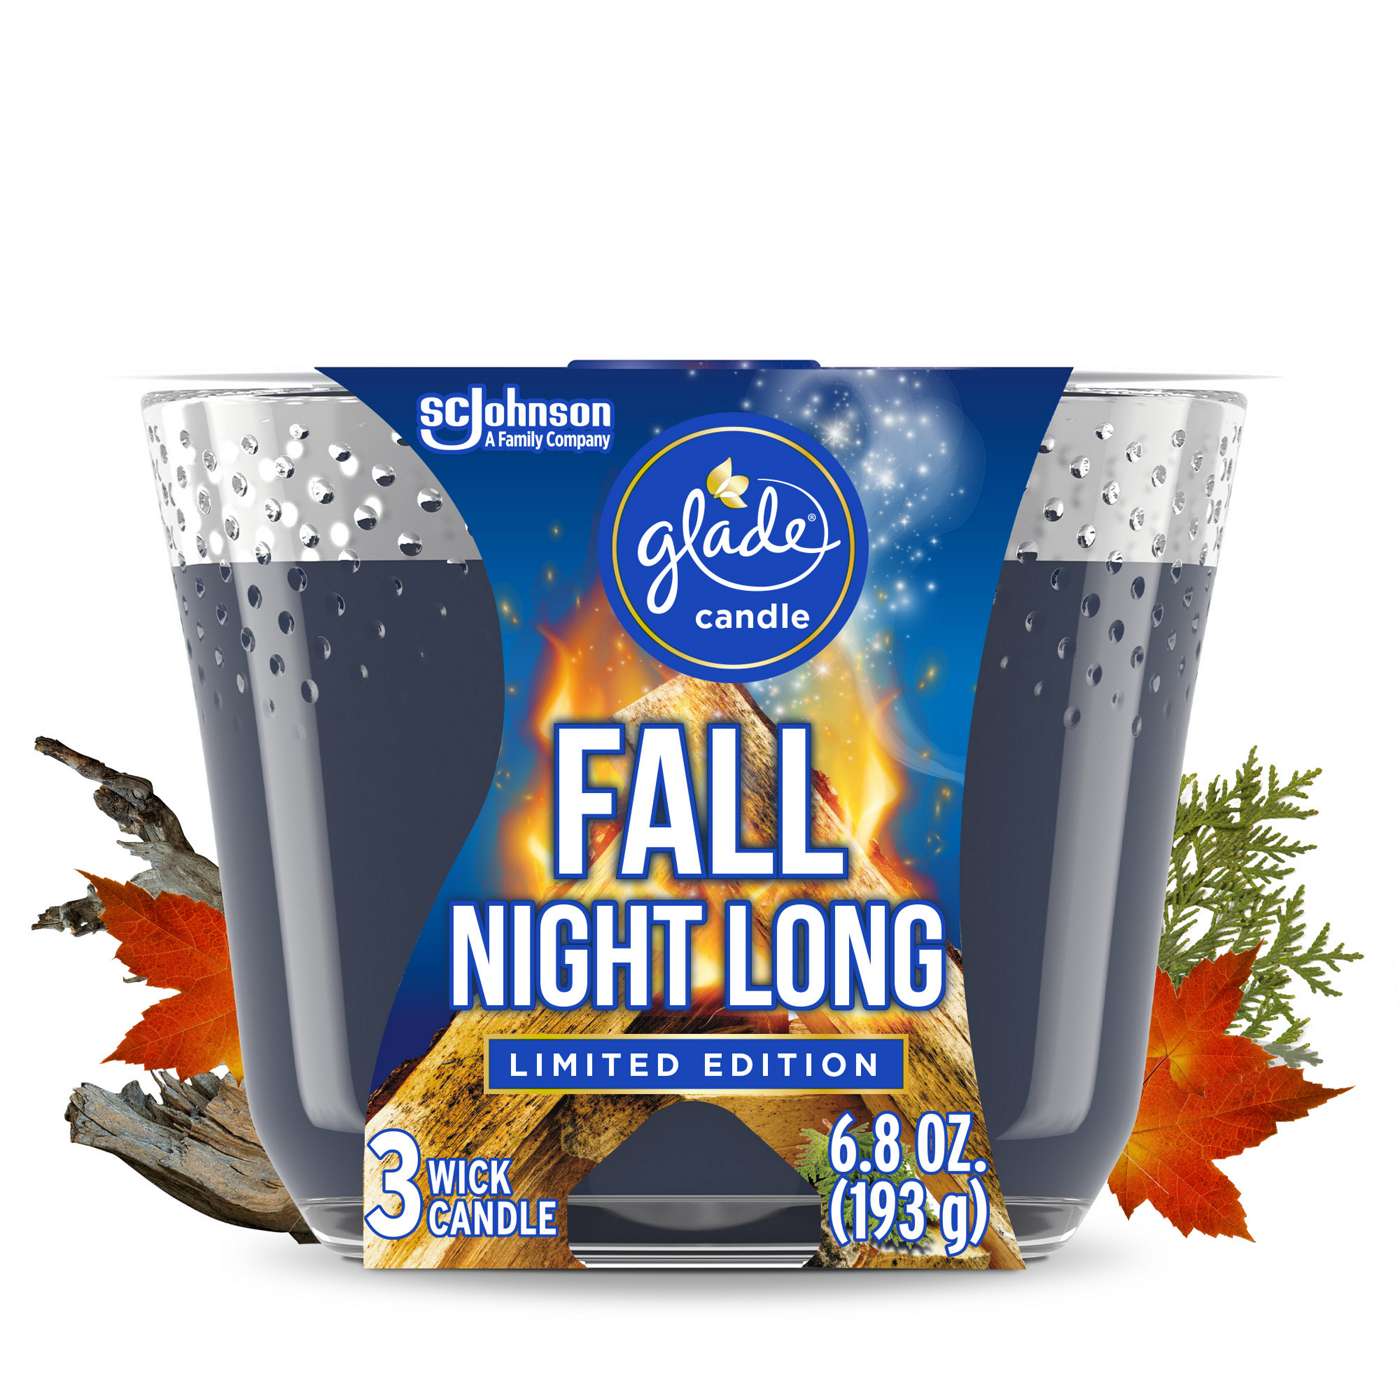 Glade Fall Night Long 3 Wick Candle; image 3 of 3